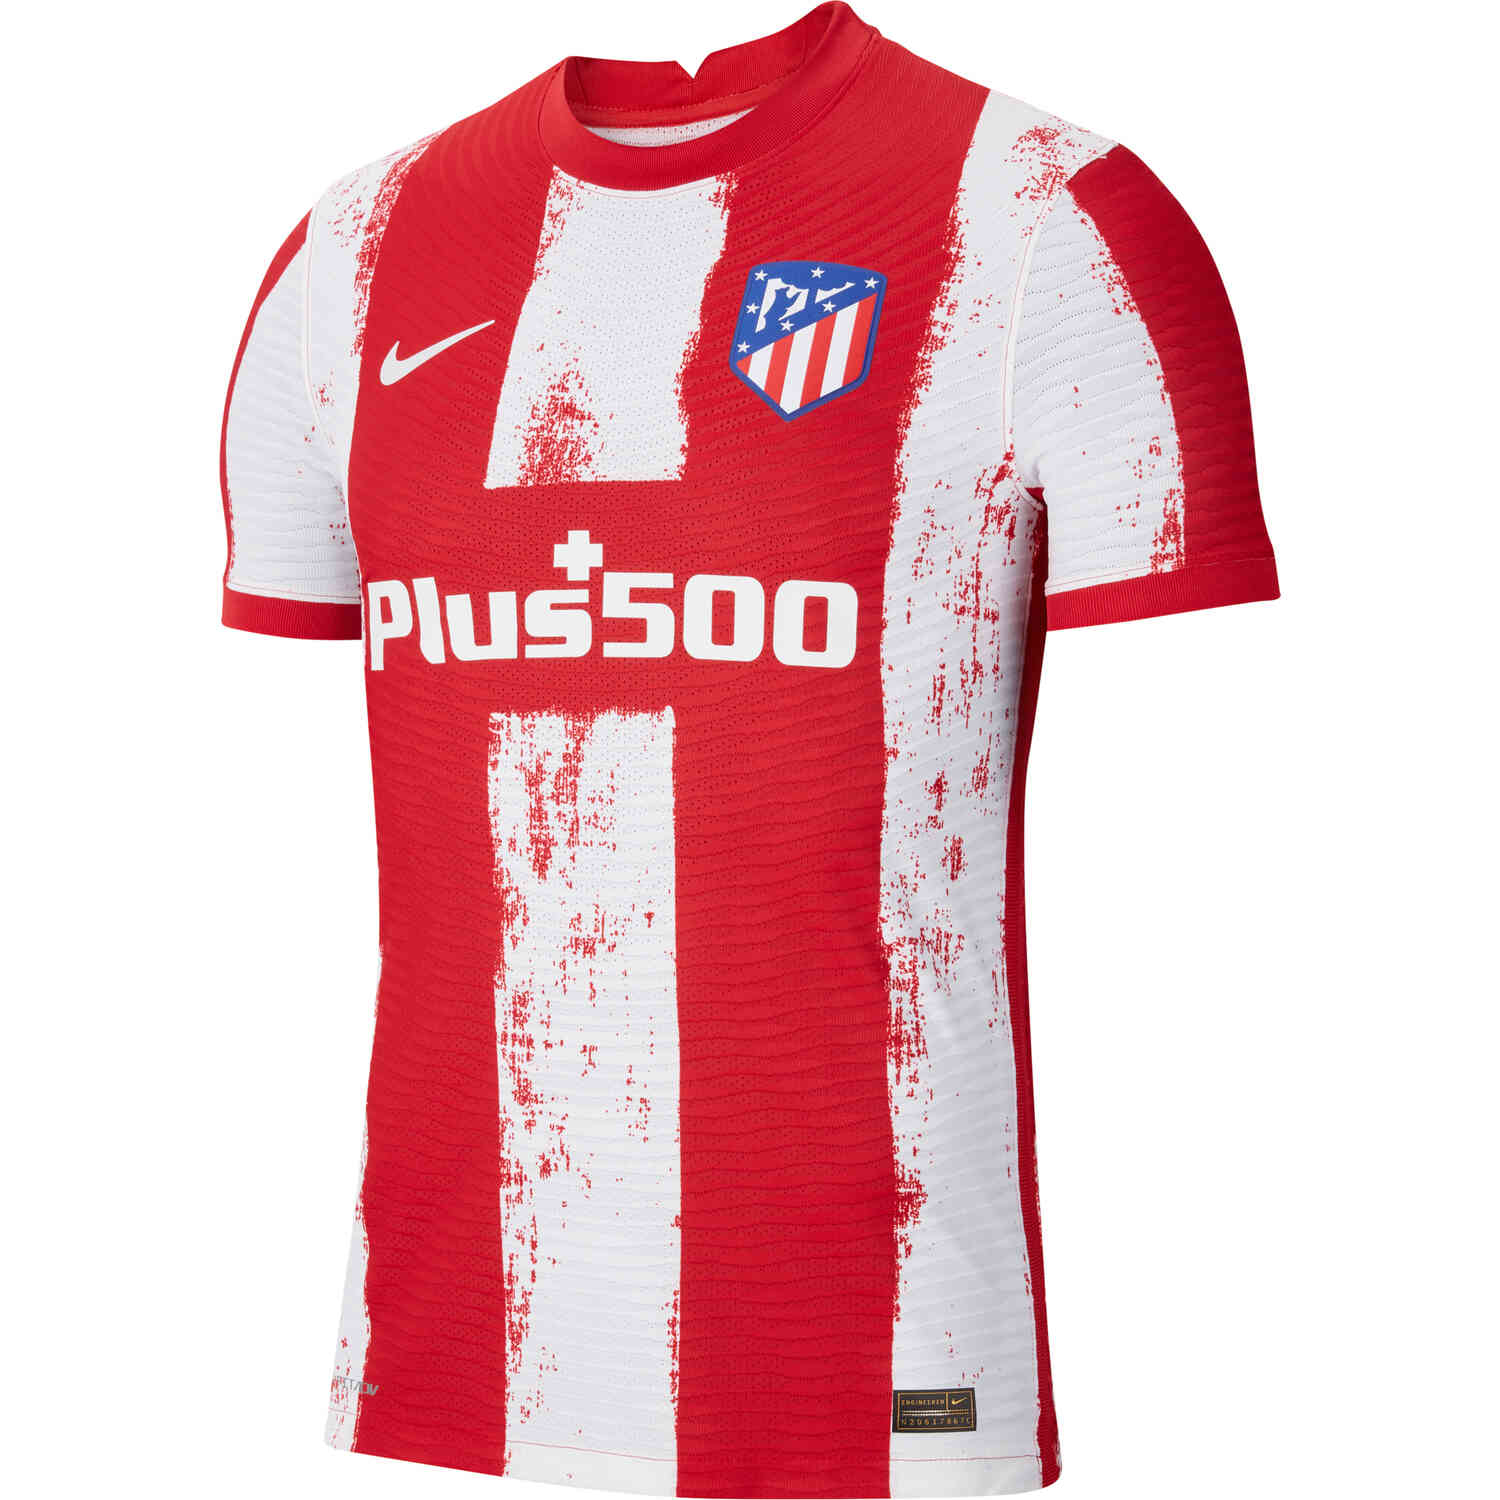 2021/22 Nike Atletico Madrid Home Match Jersey